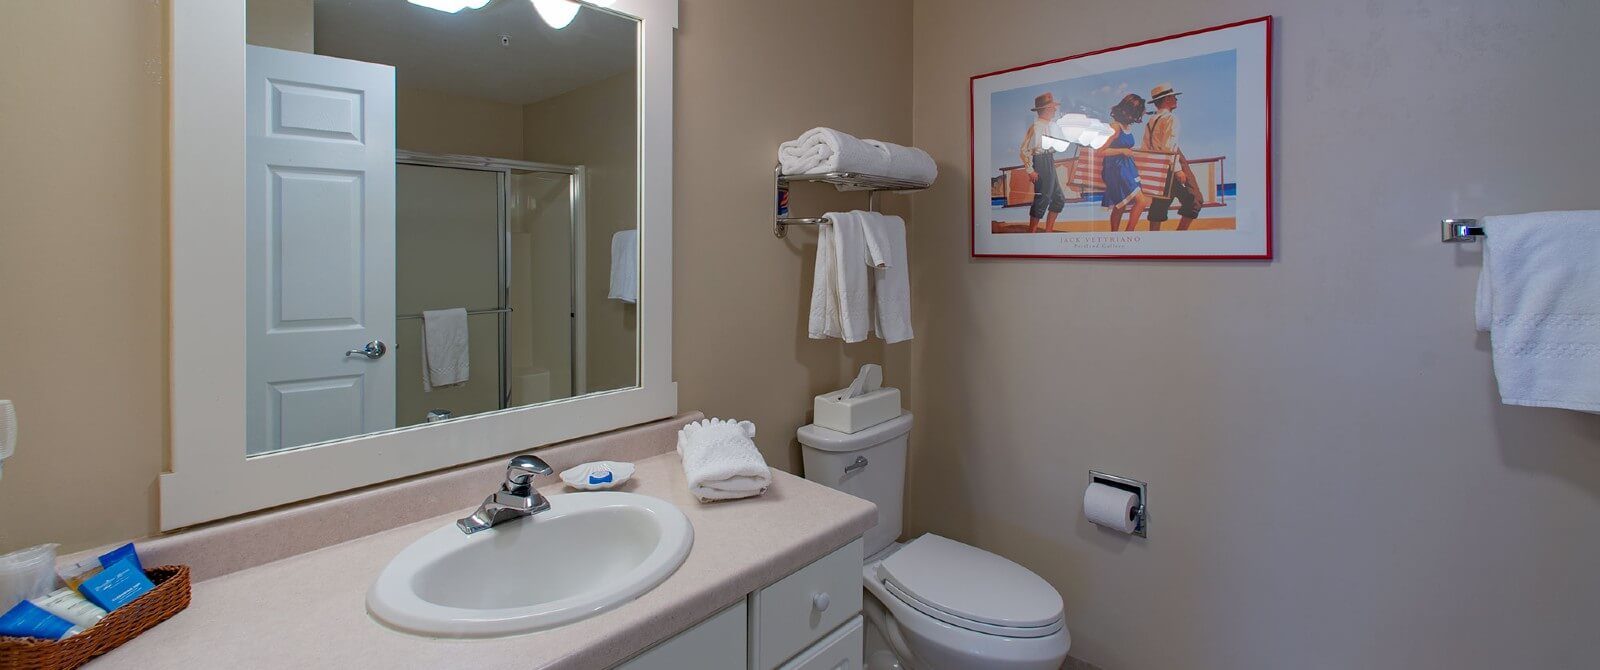 Bathroom with single sink vanity, white framed mirror, toilet and white towels